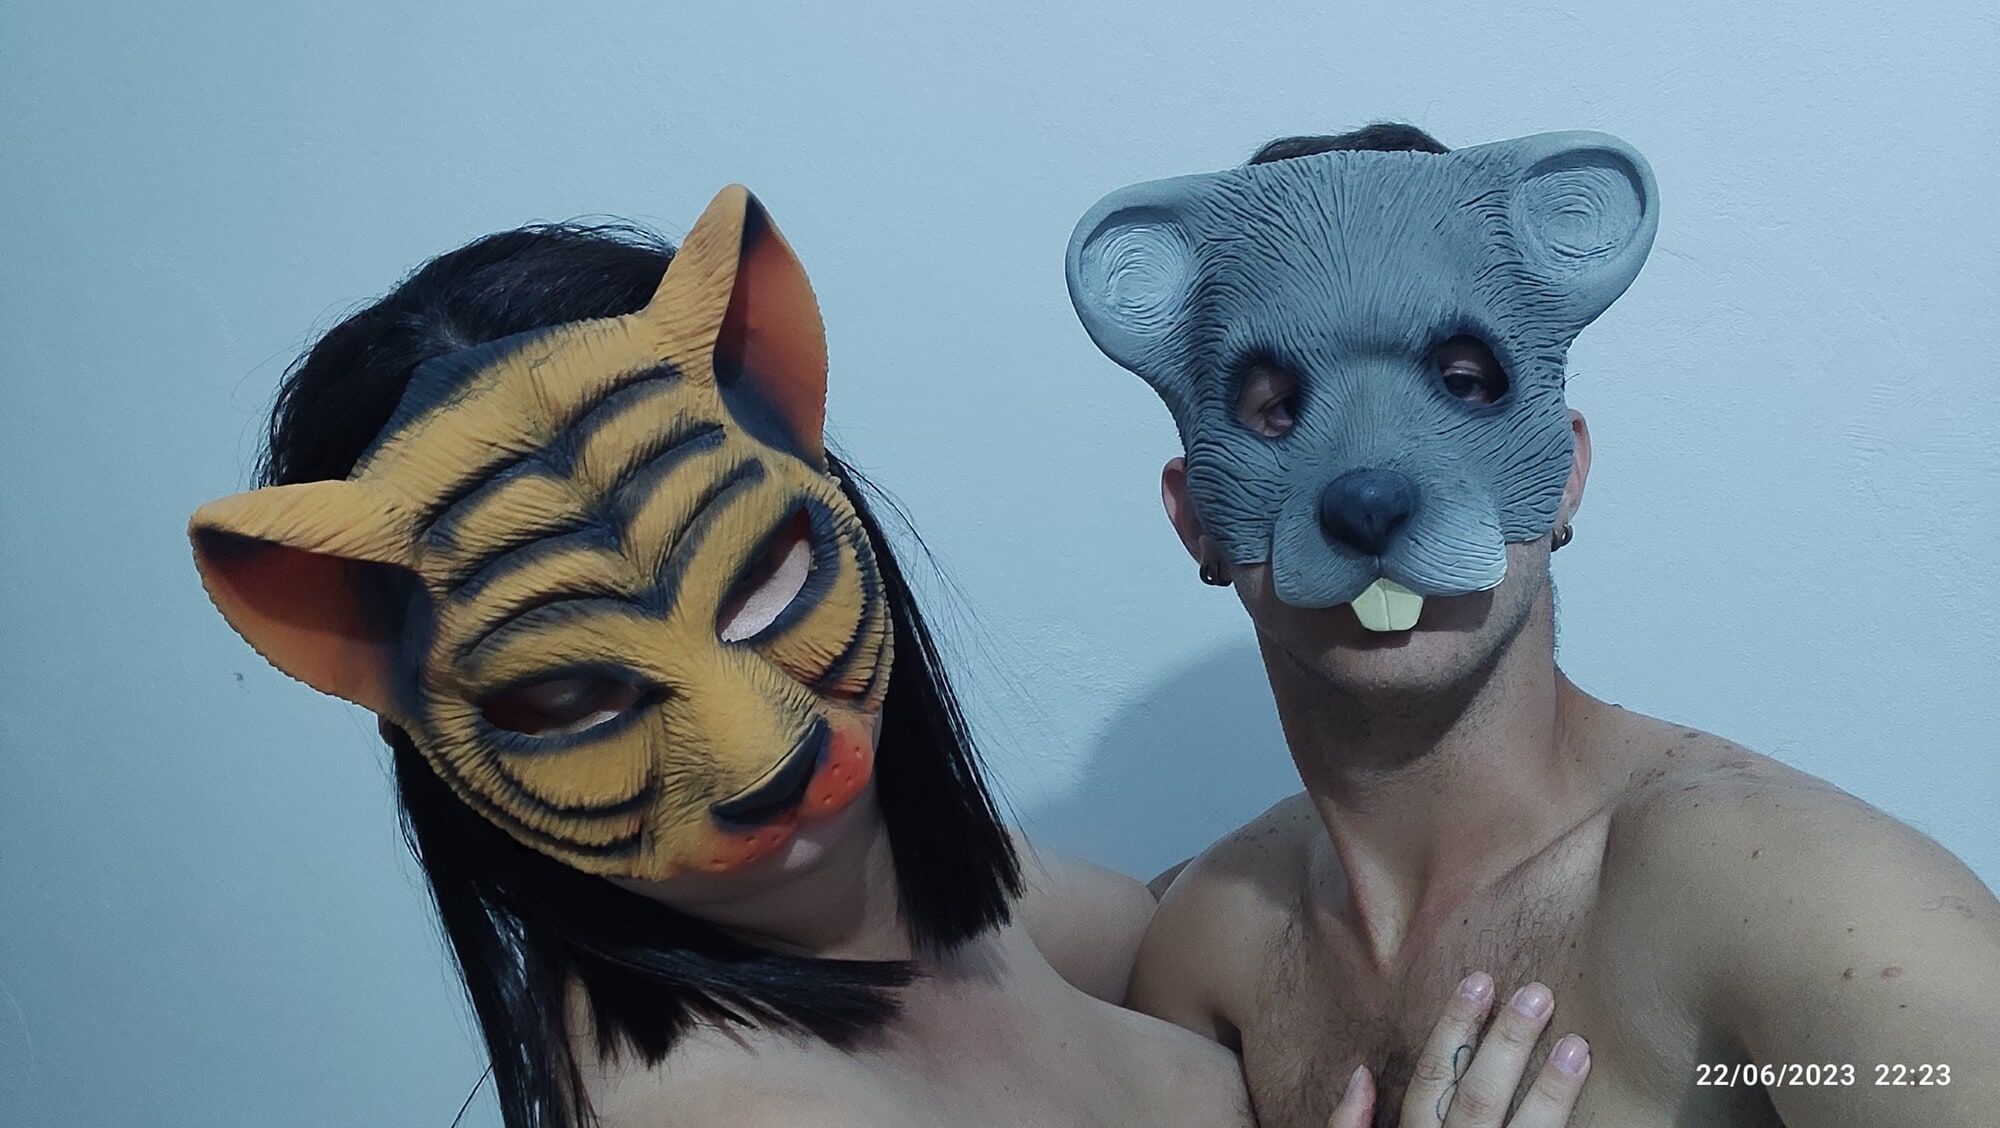 MY MARRIED HER WITH TIGER AND MOUSE MASK COSPLAY FANTASY SEX #14